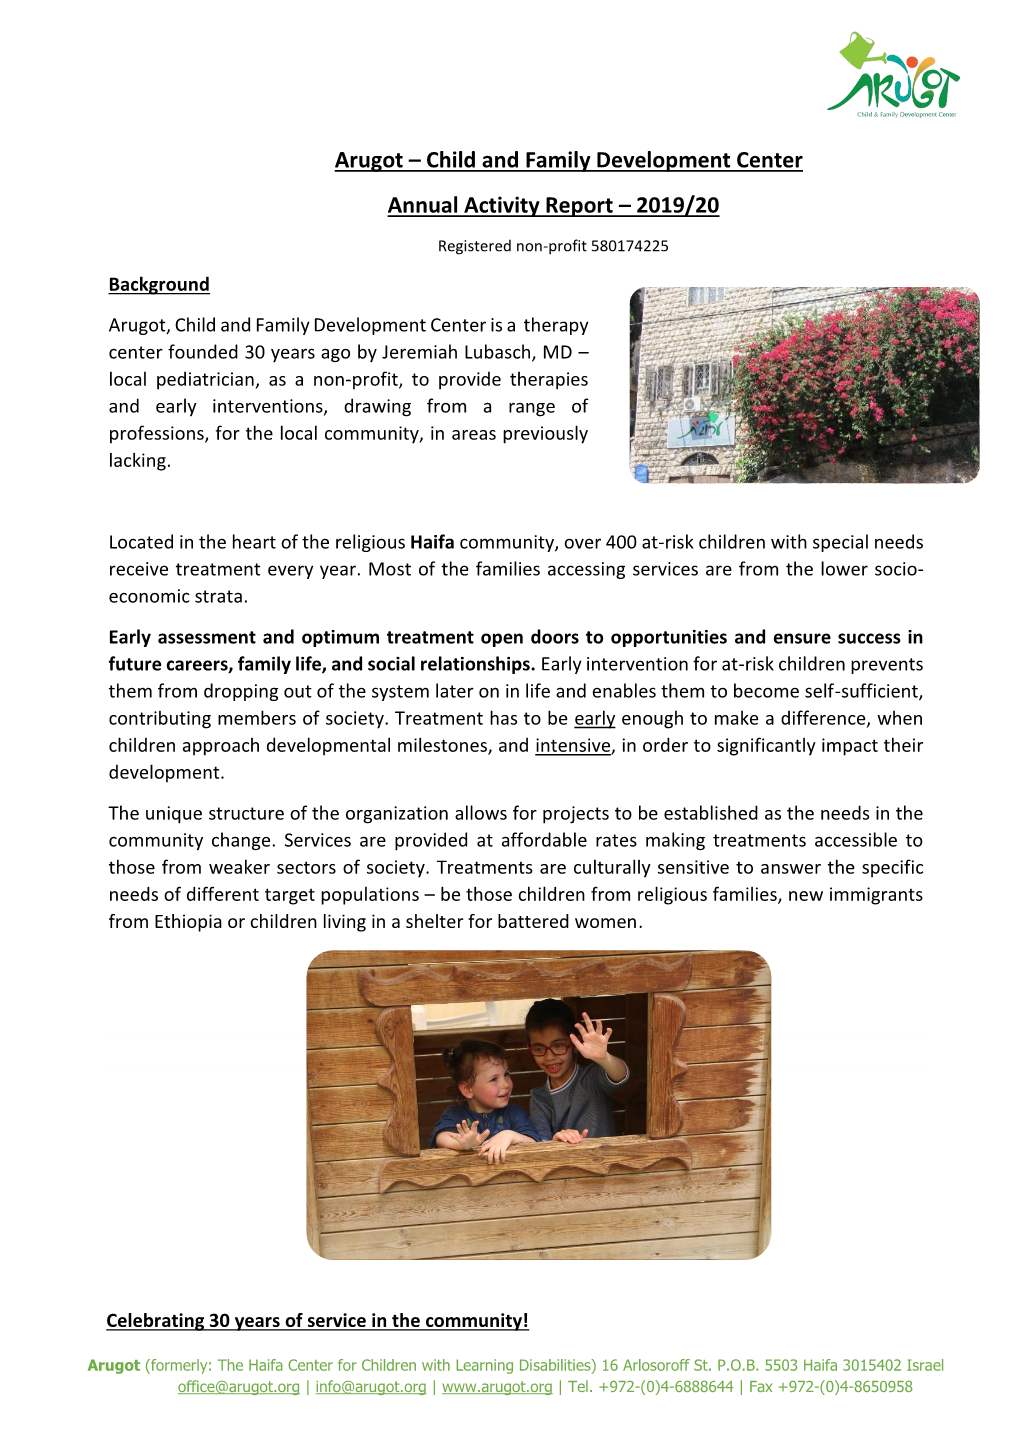 Arugot – Child and Family Development Center Annual Activity Report – 2019/20